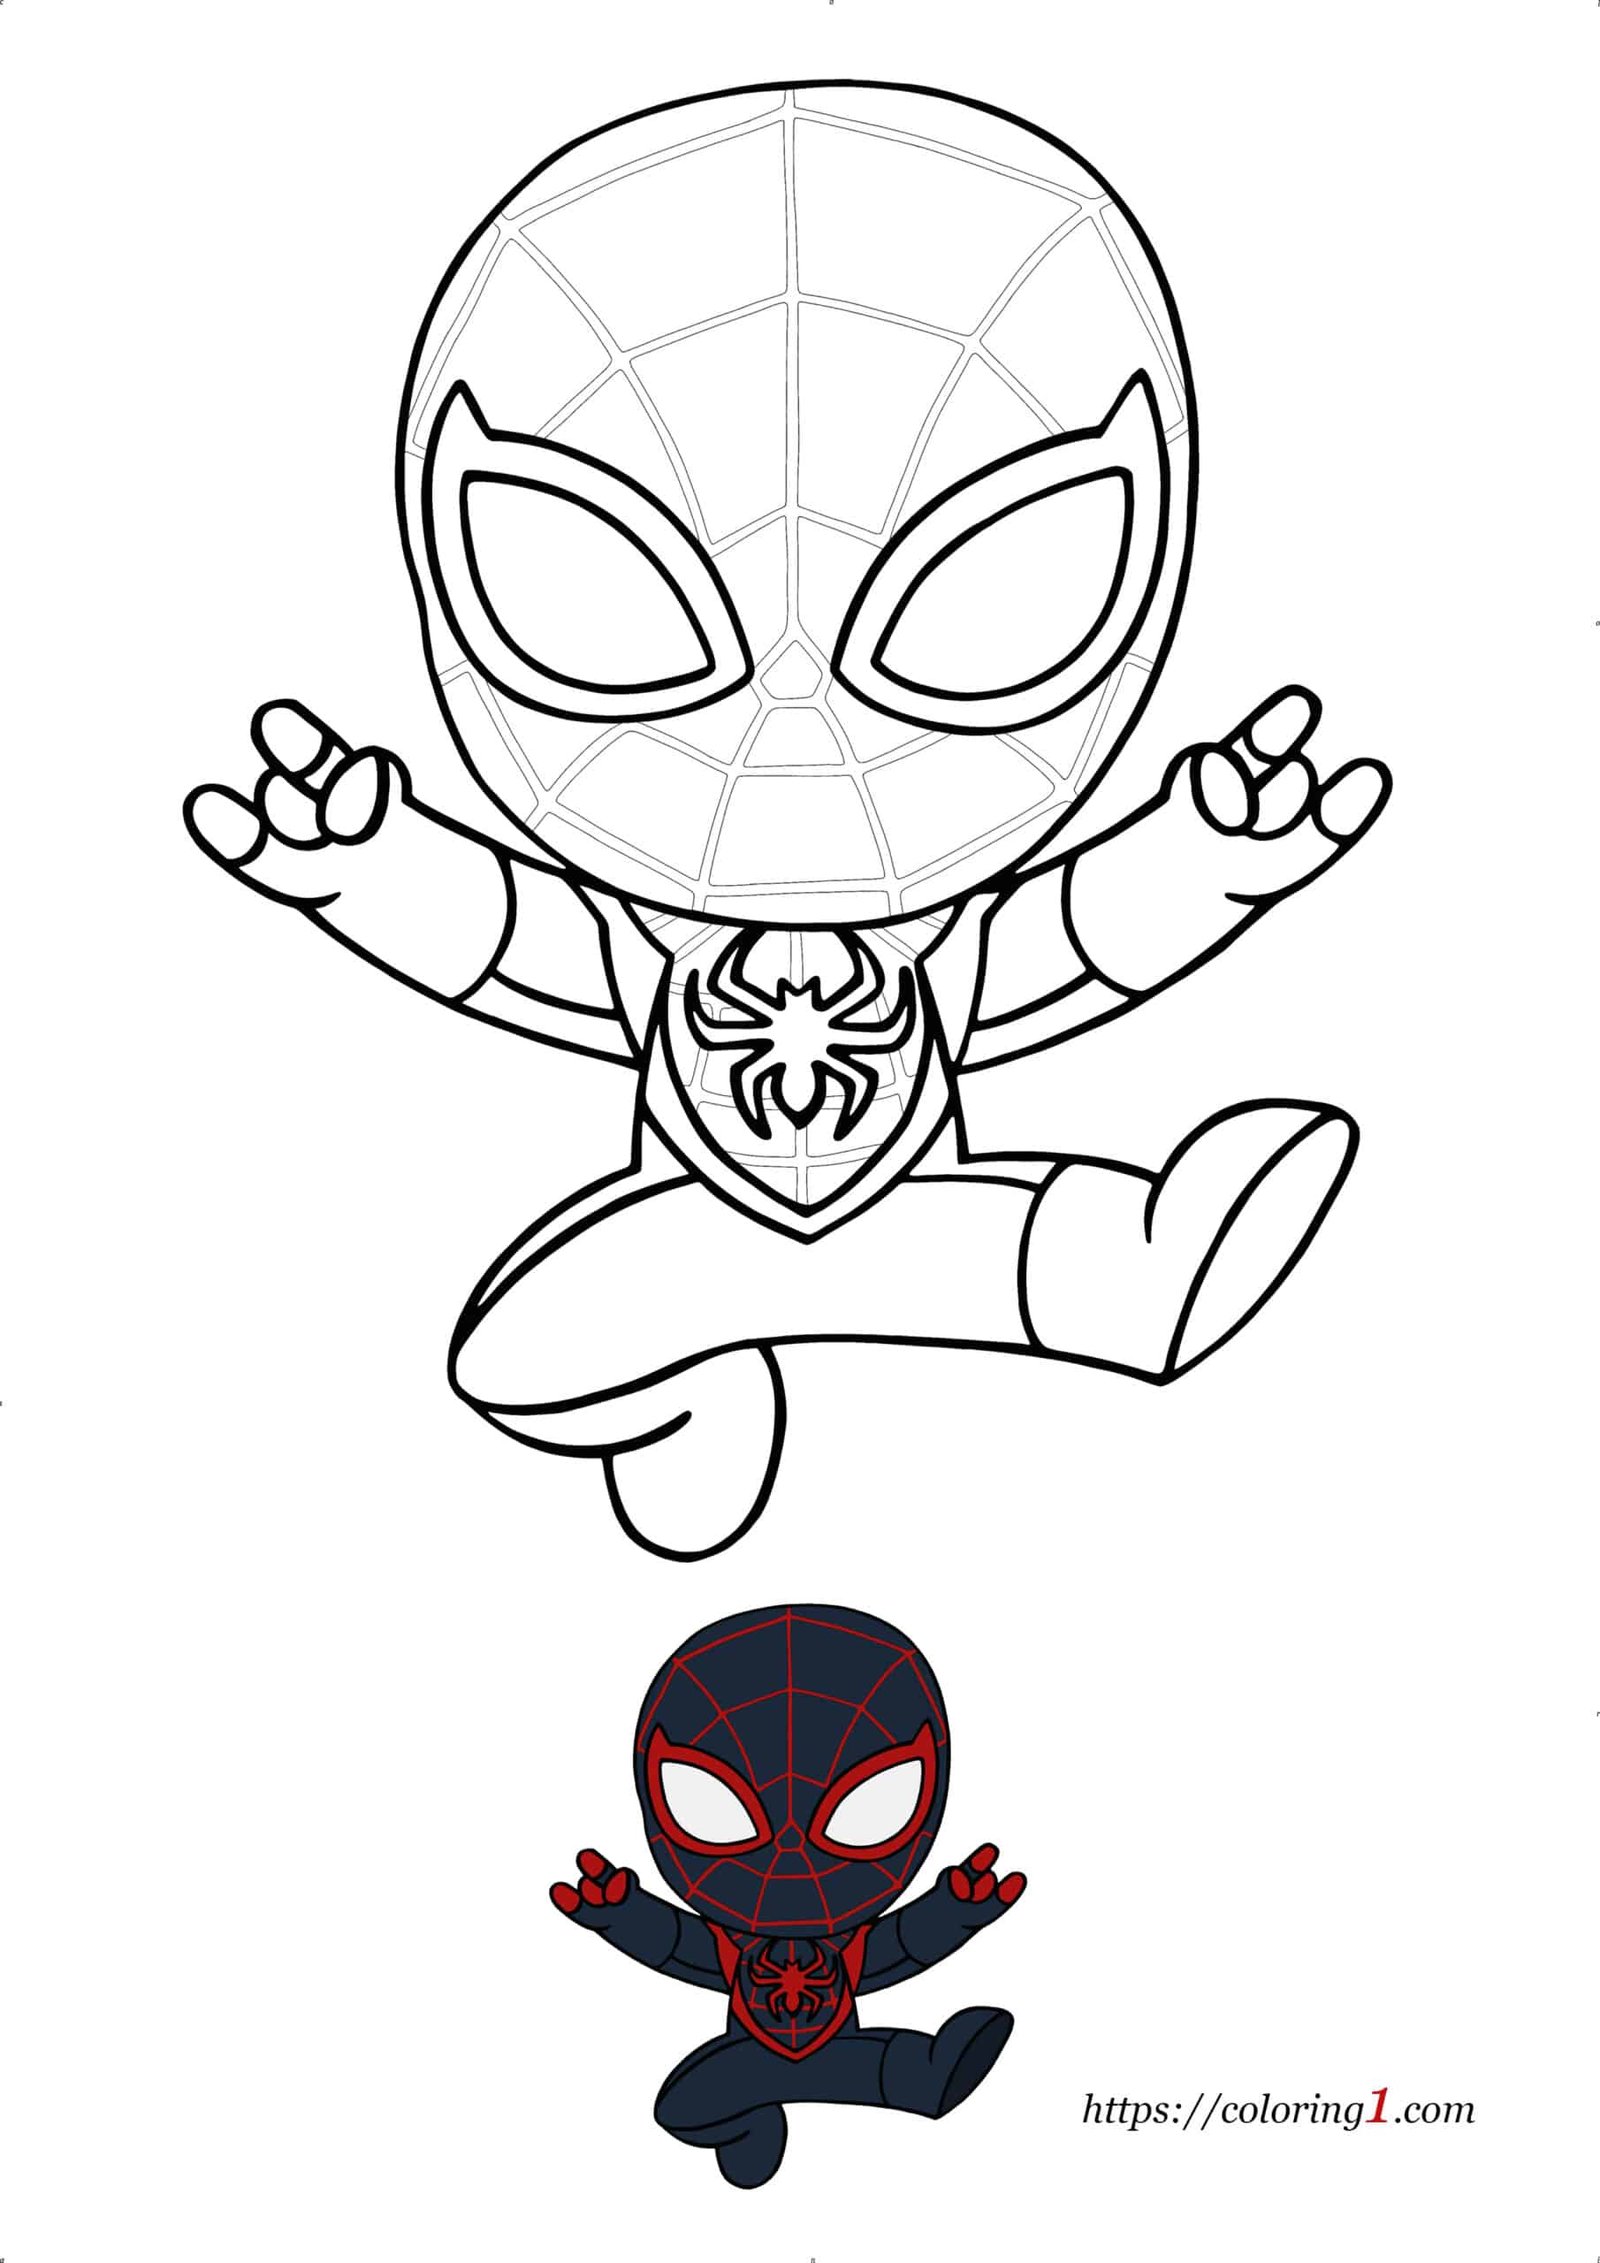 Cute Miles Morales Spiderman coloring page to print for kids